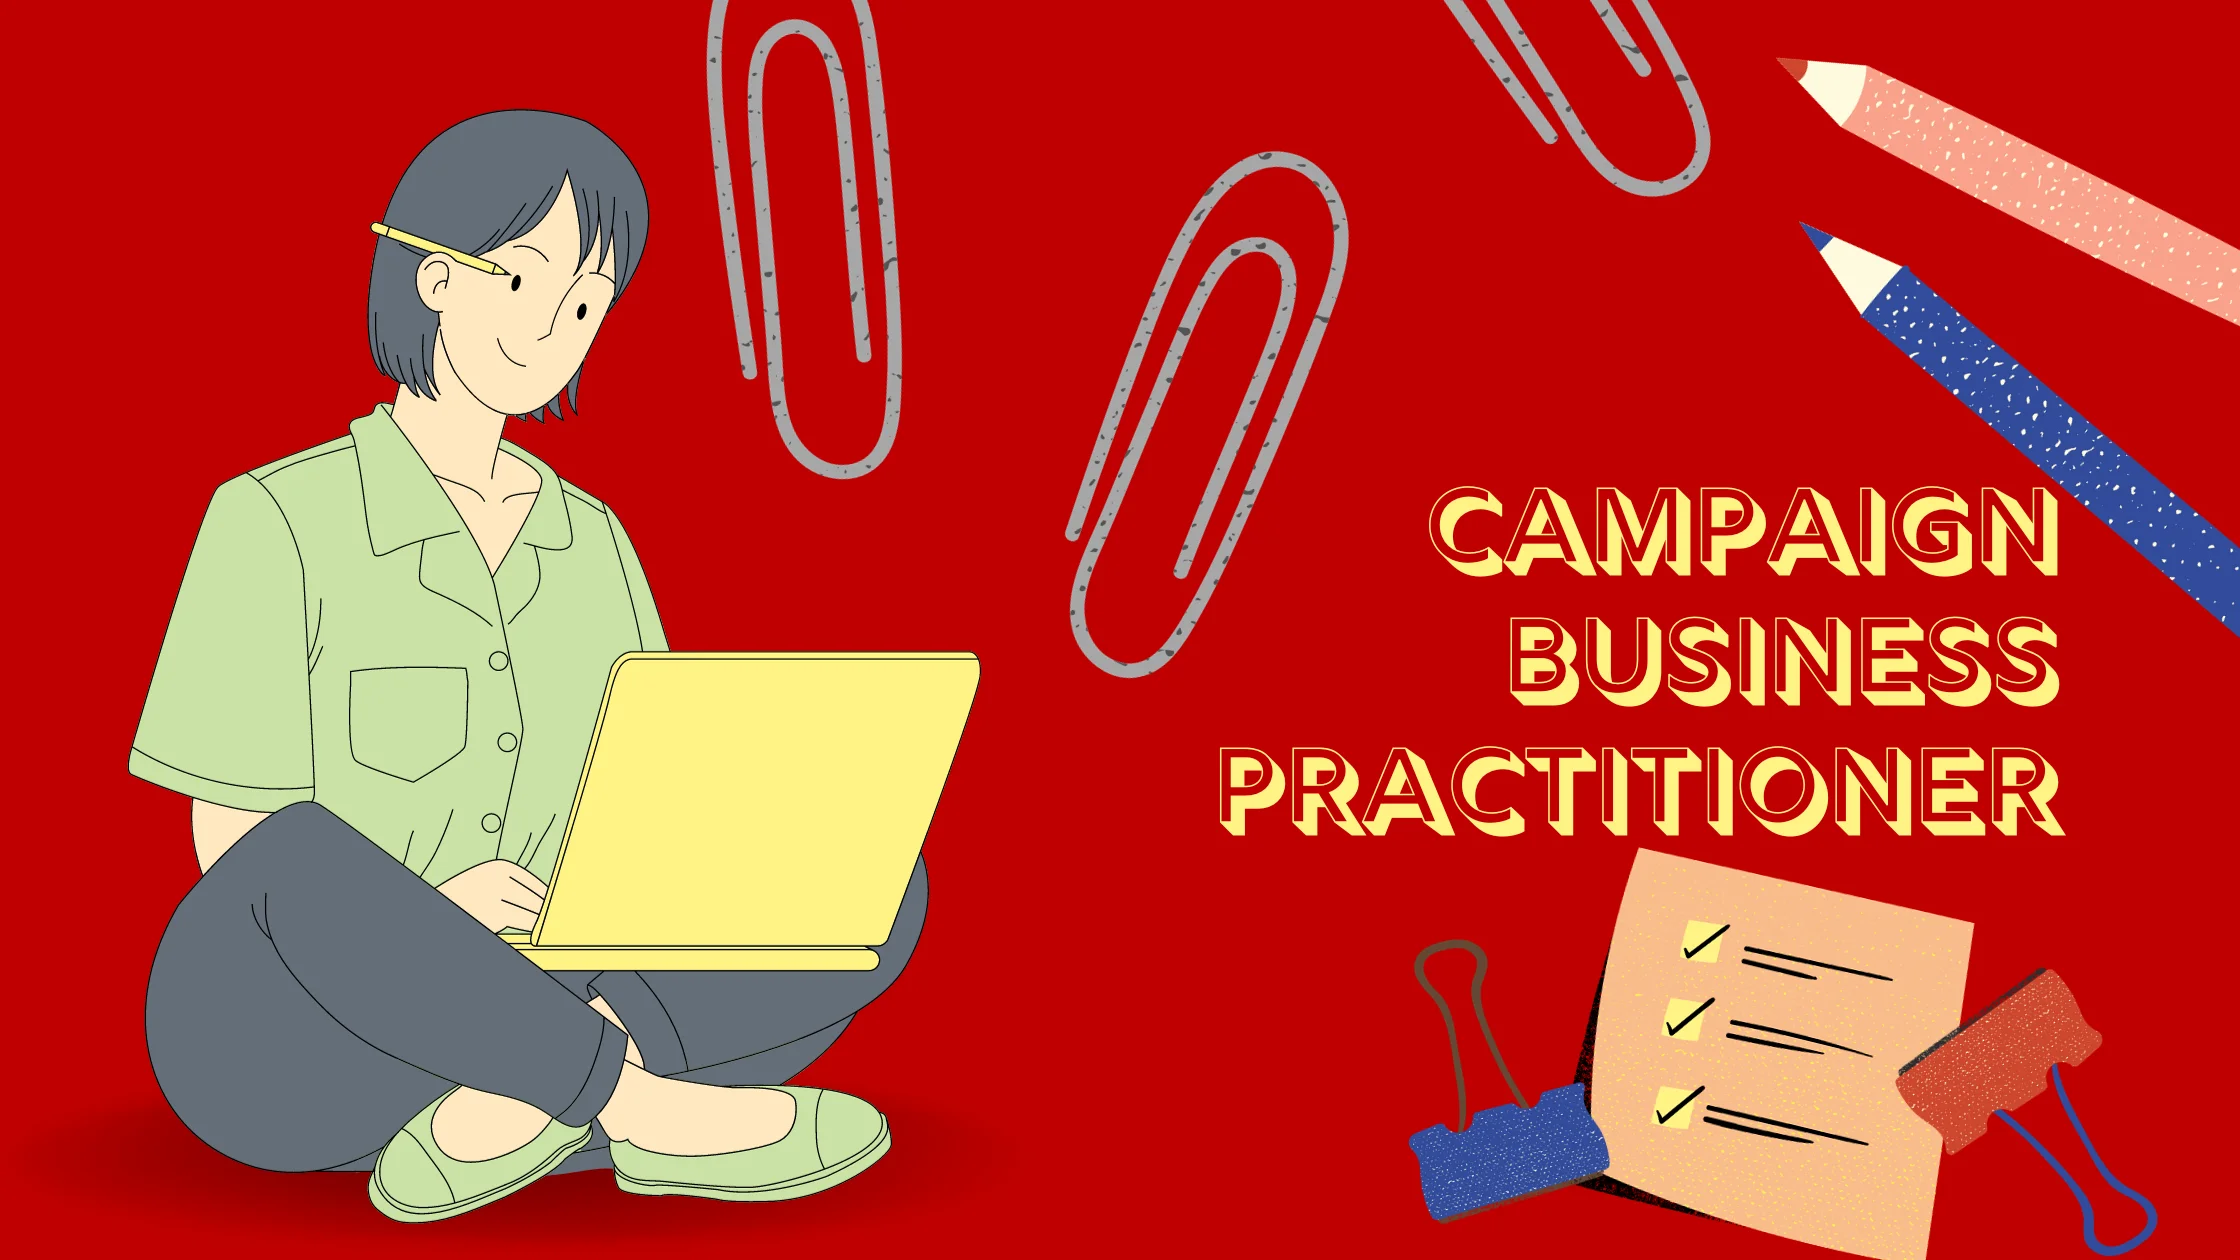 Campaign Business Practitioner success